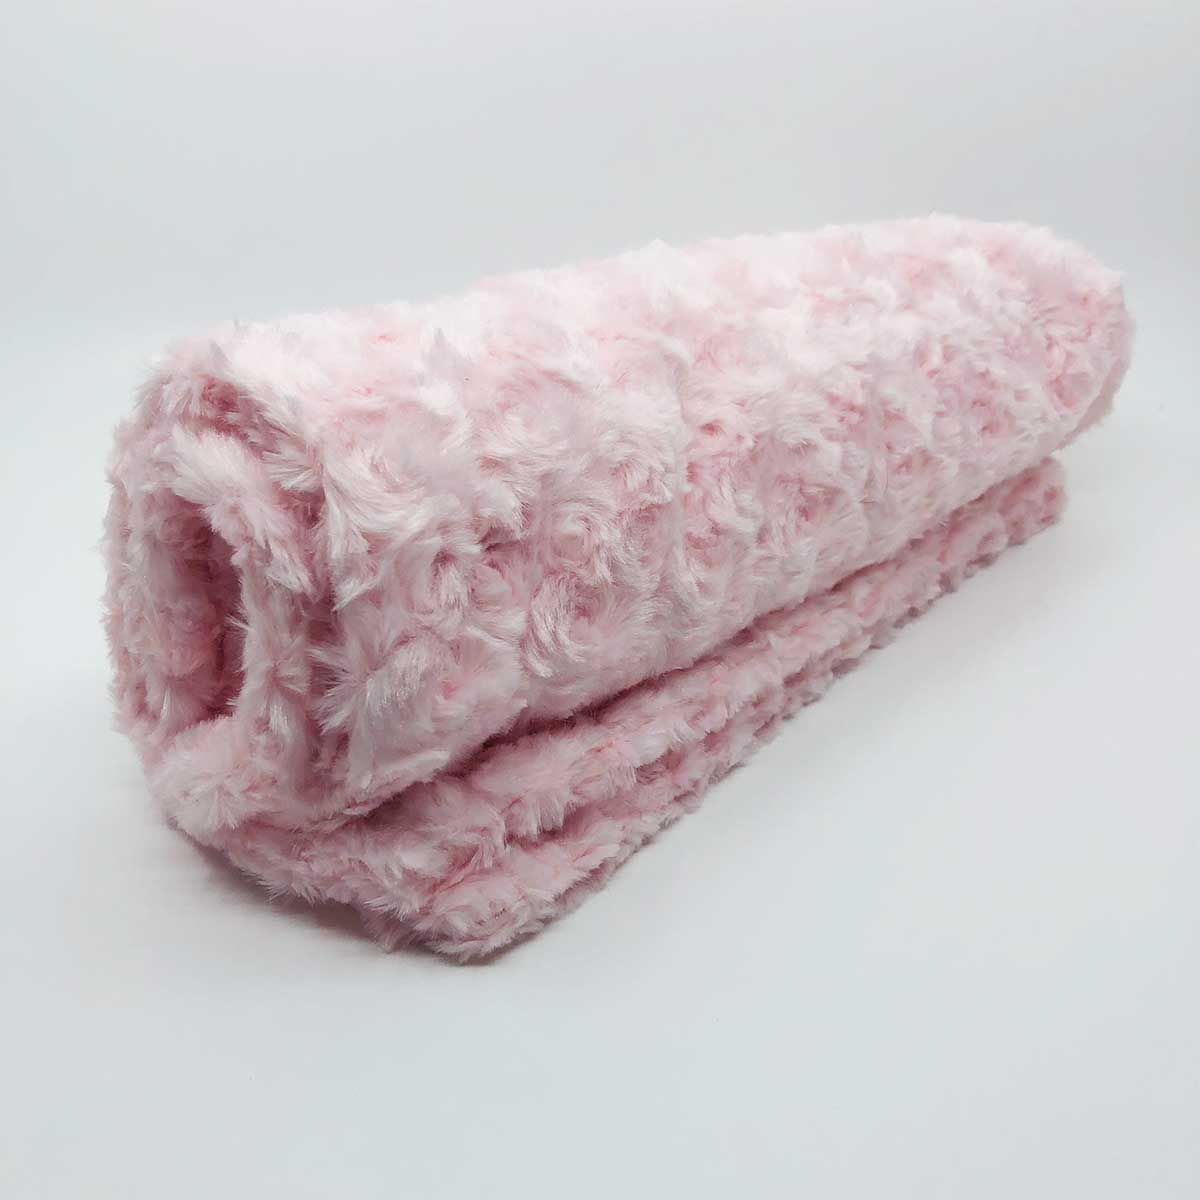 Minky Pet Blankets in Pink Rosette Pattern | Pawlicious & Company